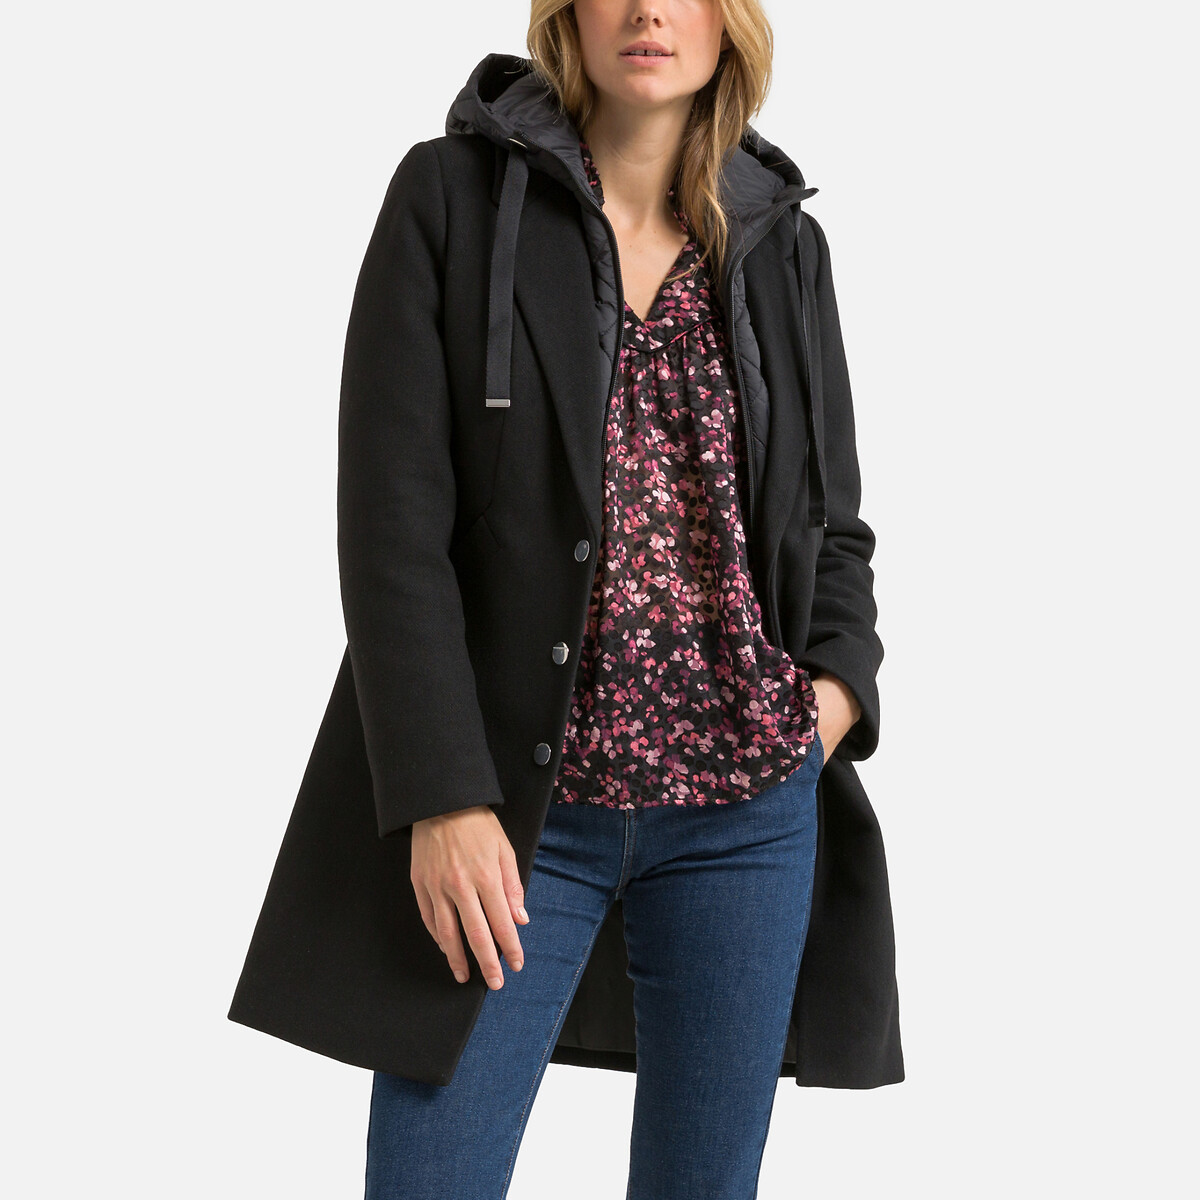 Dual Fabric Hooded Coat with Removable Liner Jacket